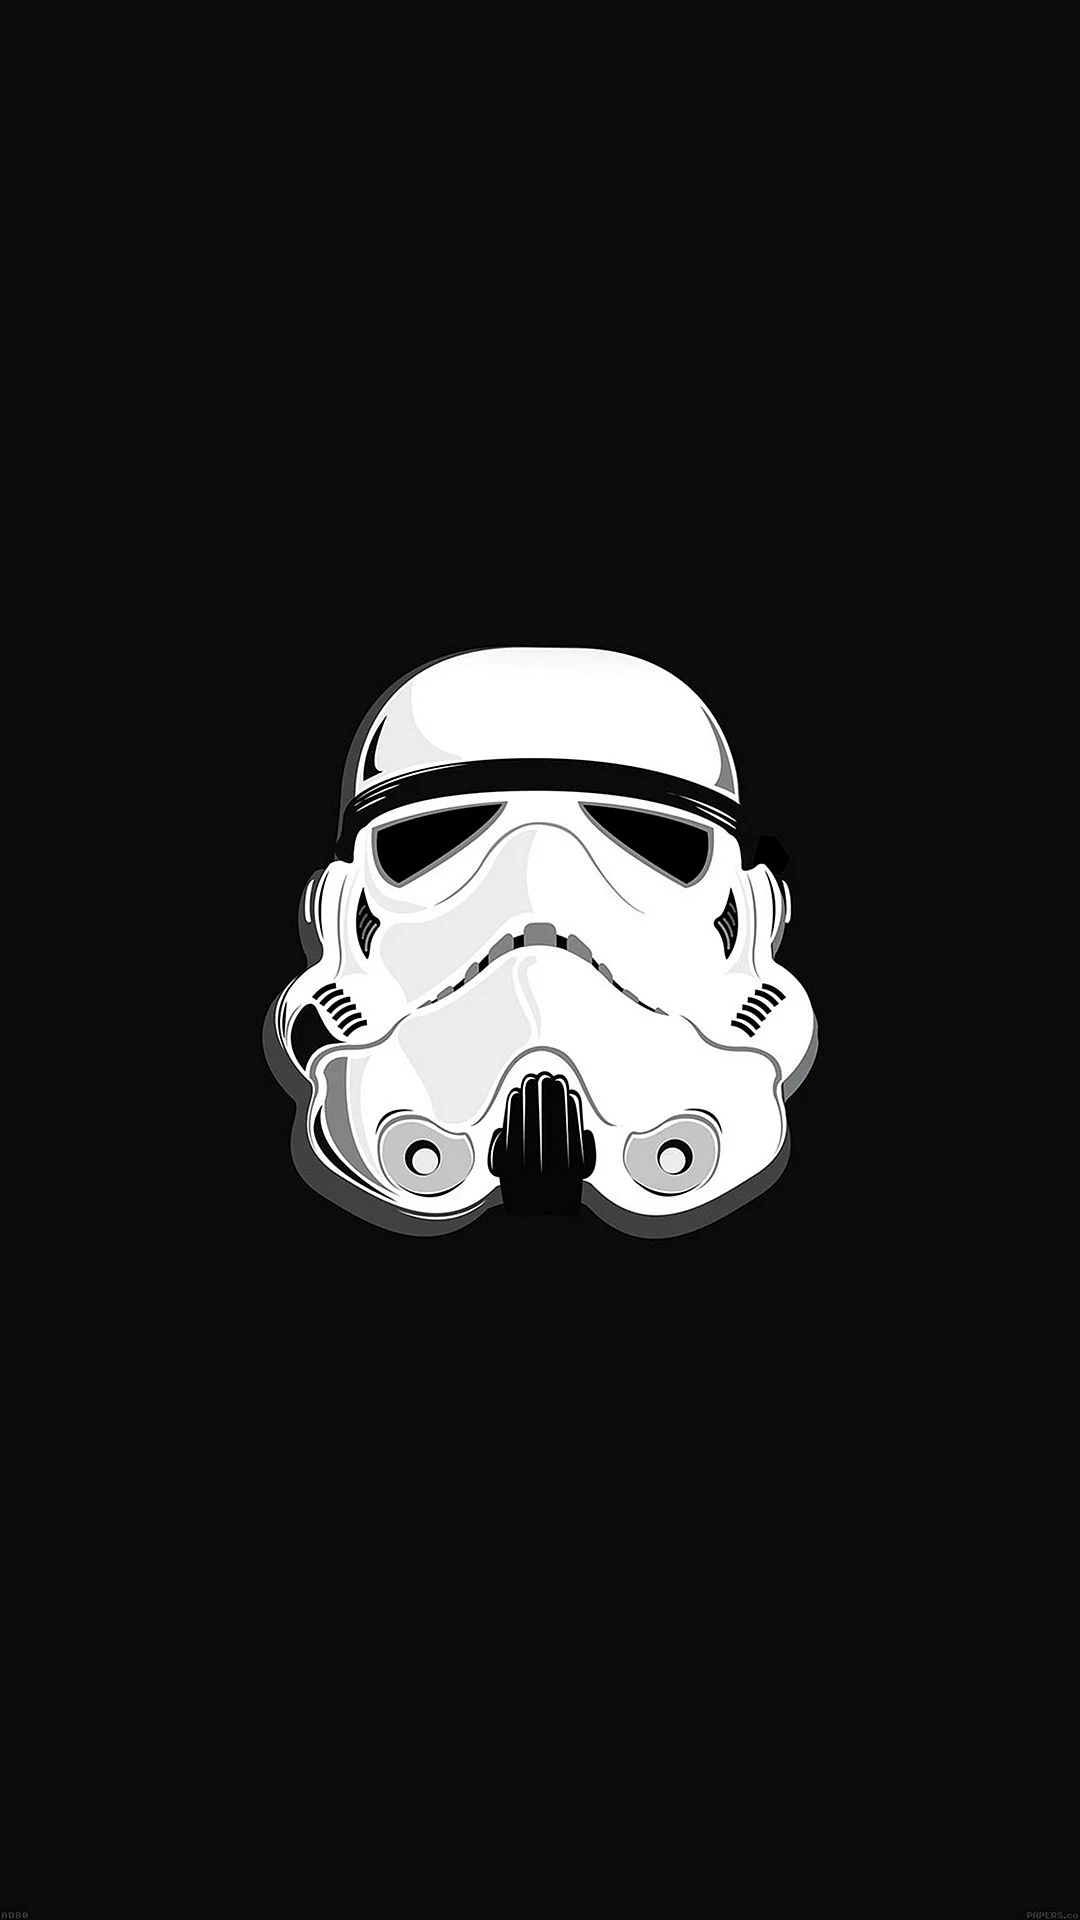 Star Wars iPhone Wallpaper For iPhone